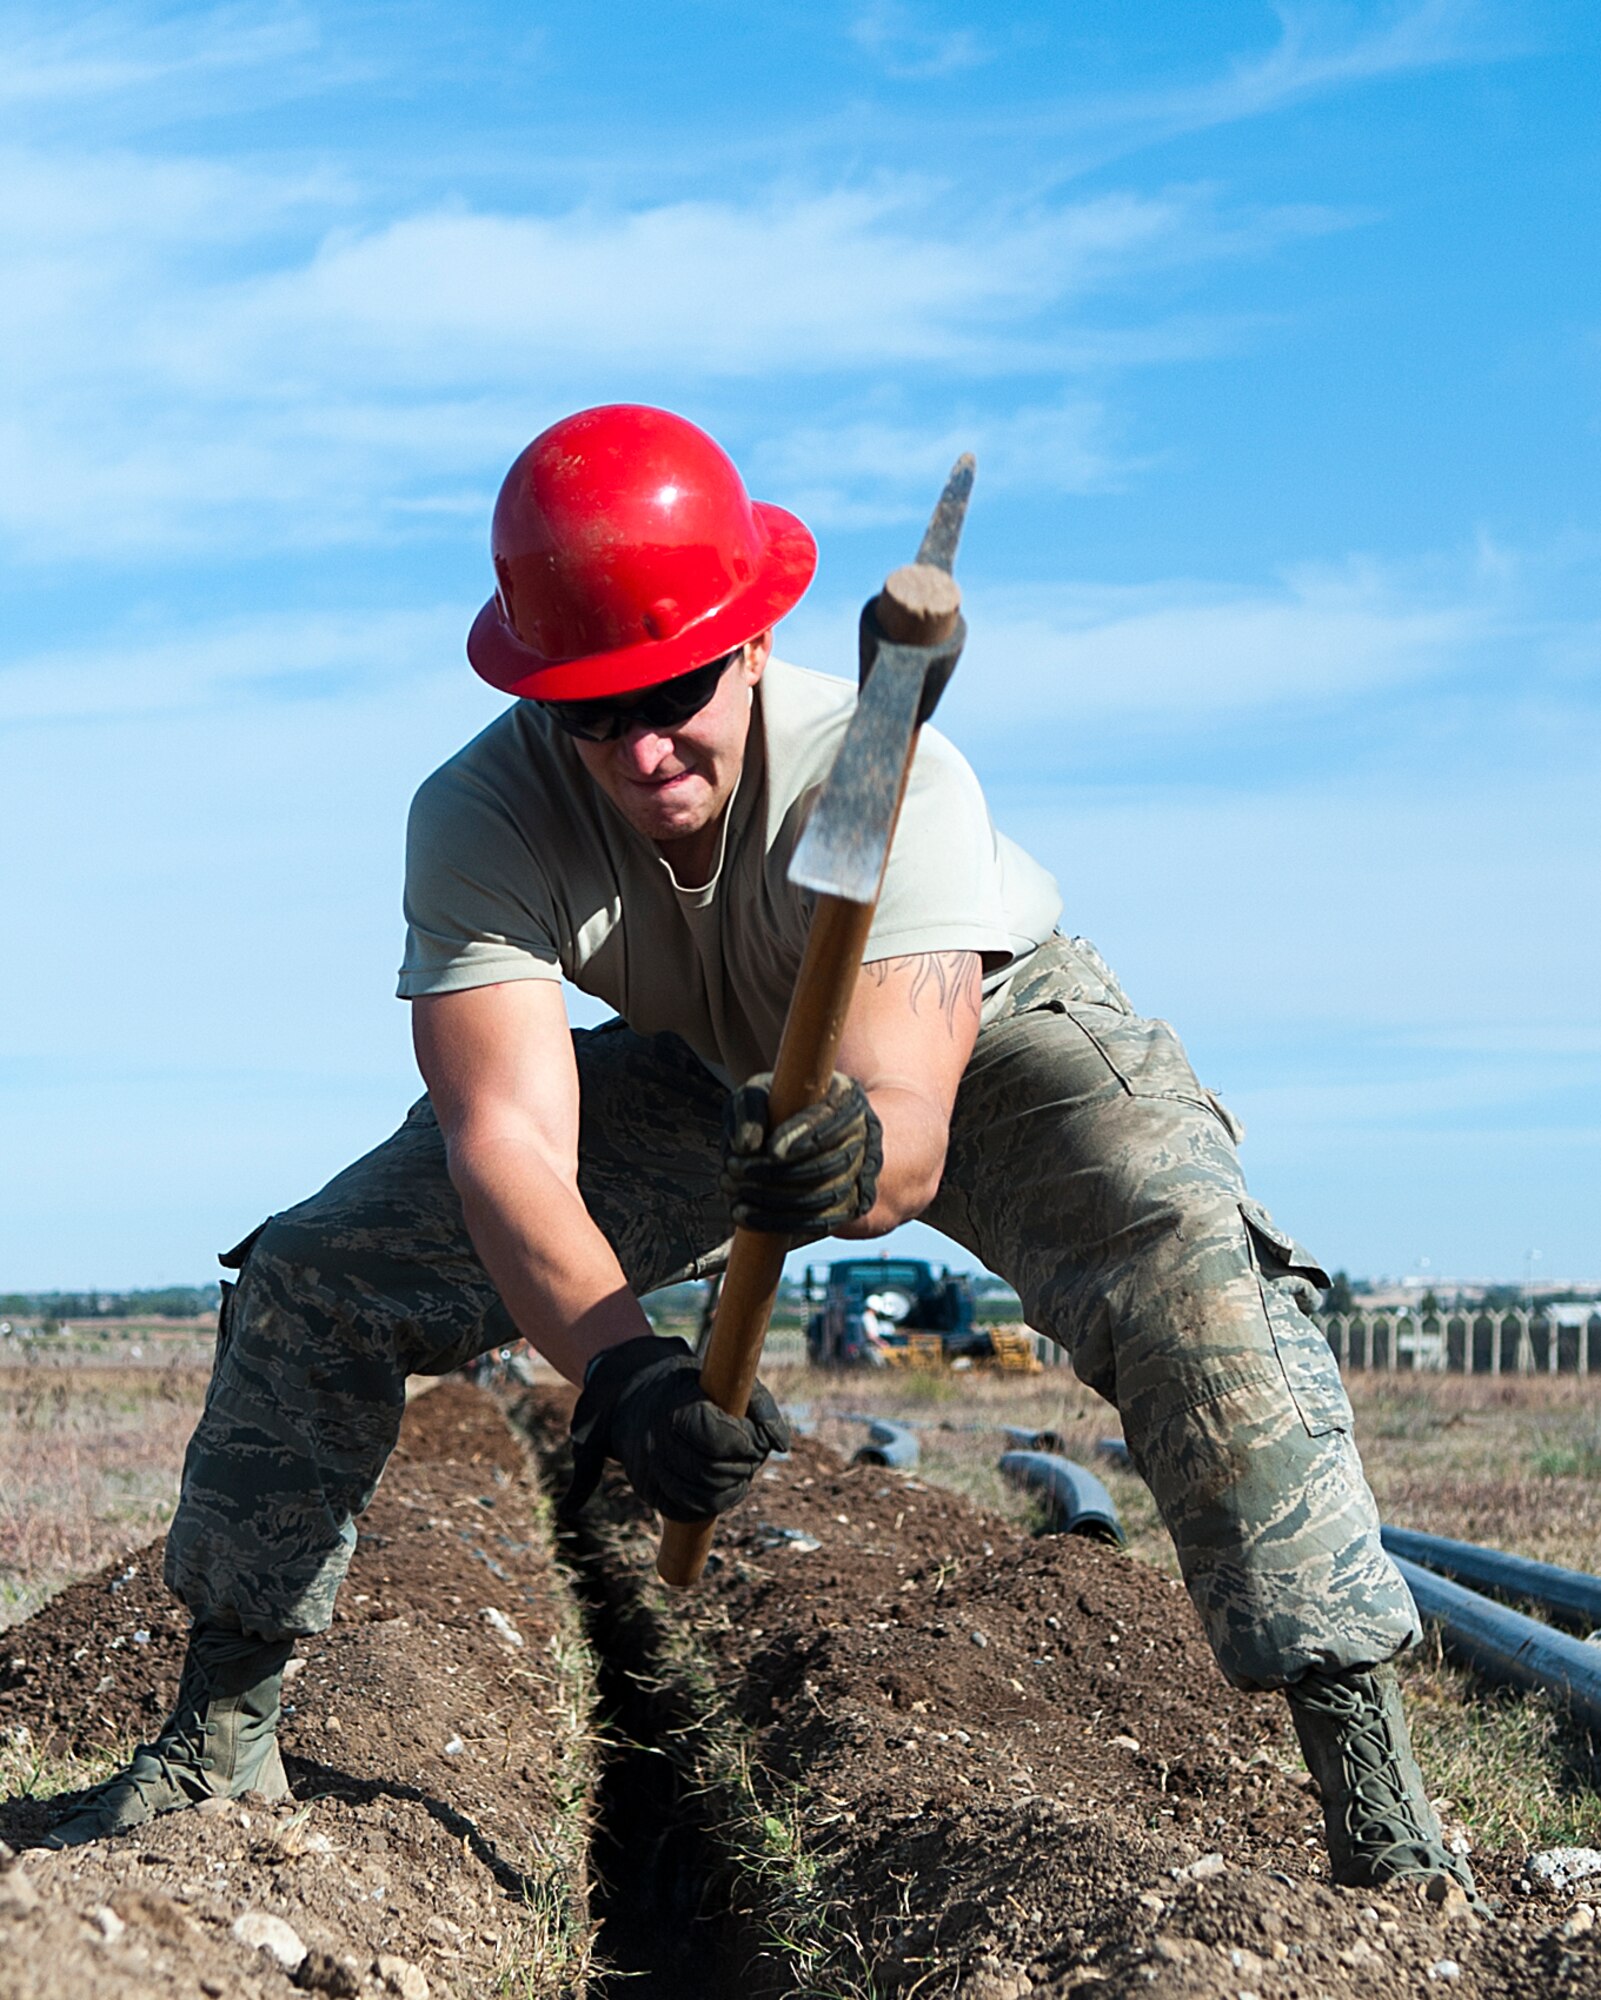 Airman 1st Class Trevor Hermosillo, a 39th Communications Squadron cable and antenna technician, unearths rocks while preparing to install underground communication lines Nov. 18, 2015, at Incirlik Air Base, Turkey. Laying communication cable is the first of many steps to establishing communications infrastructure. The squadron works to establish and maintain new and old infrastructure to ensure Incirlik and Operation Inherent Resolve missions are accomplished. (U.S. Air Force photo/Staff Sgt. Jack Sanders)